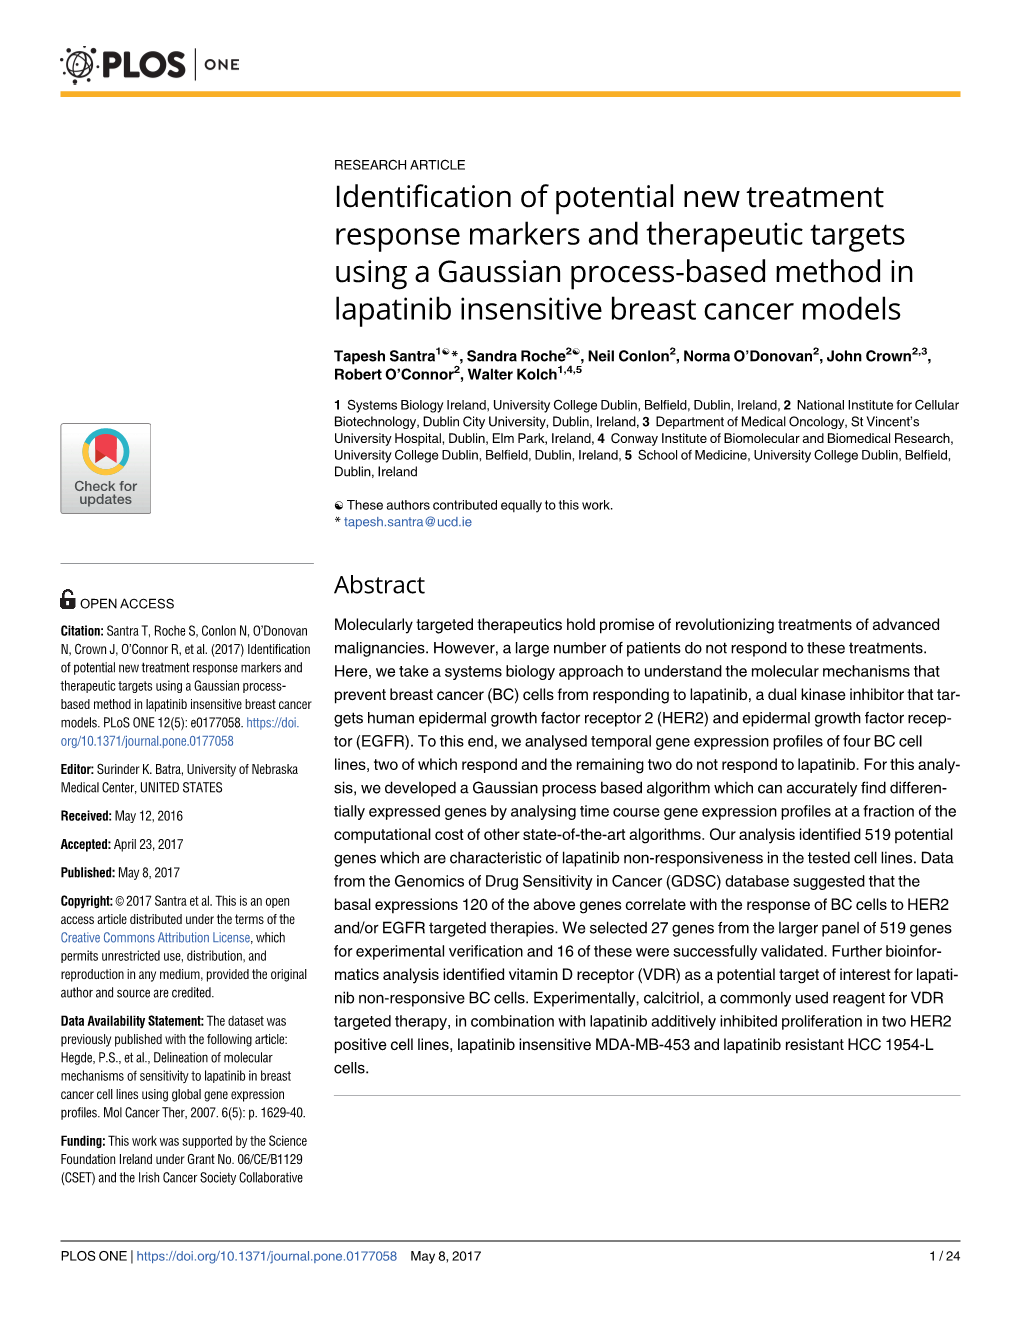 Identification of Potential New Treatment Response Markers and Therapeutic Targets Using a Gaussian Process-Based Method in Lapatinib Insensitive Breast Cancer Models